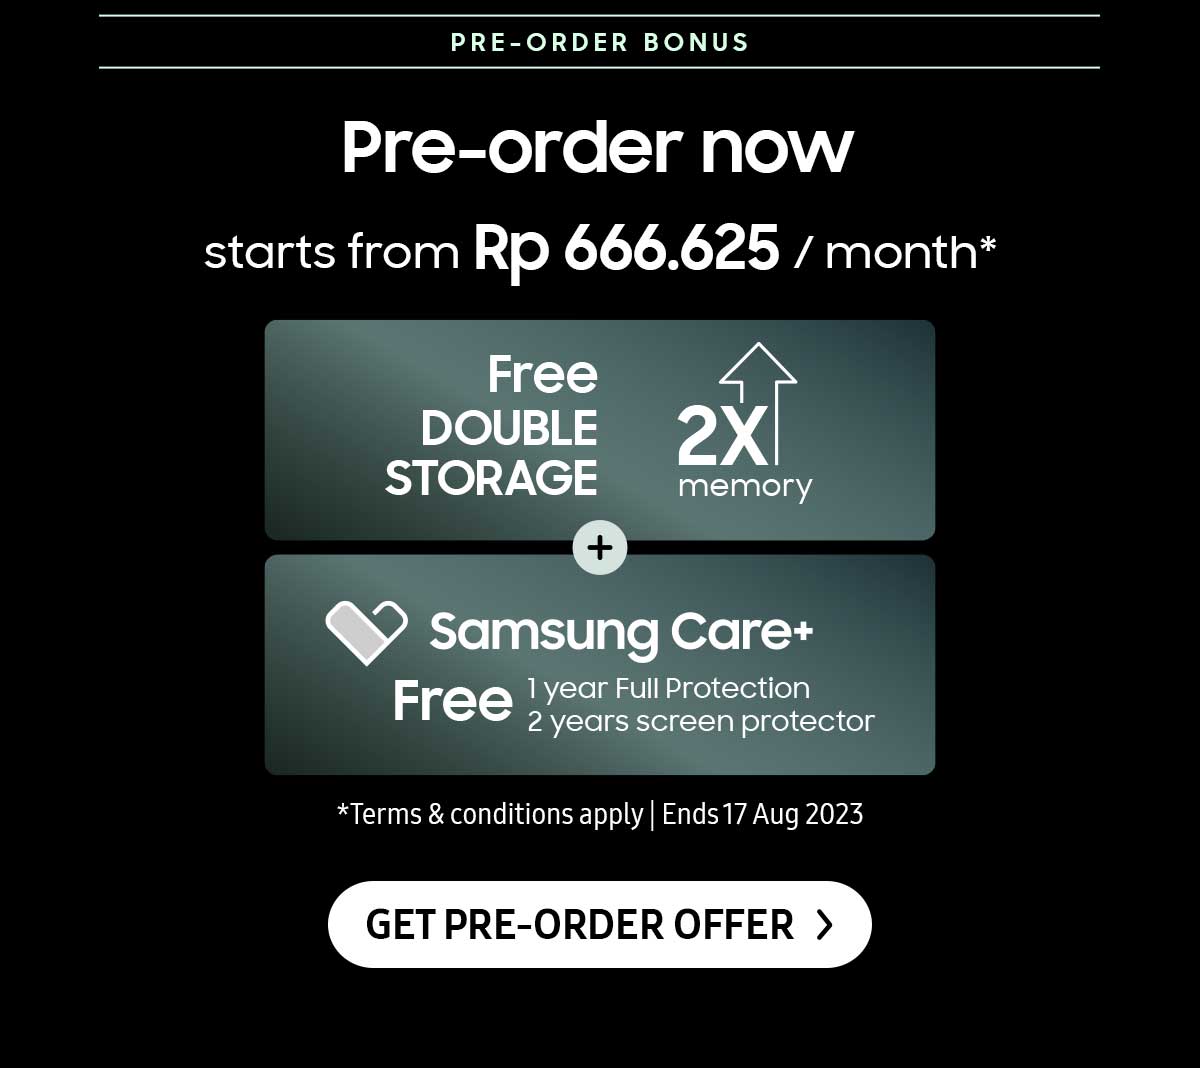 Pre-order now and get Free Double Storage + Samsung Care+. Click here to get the offer!